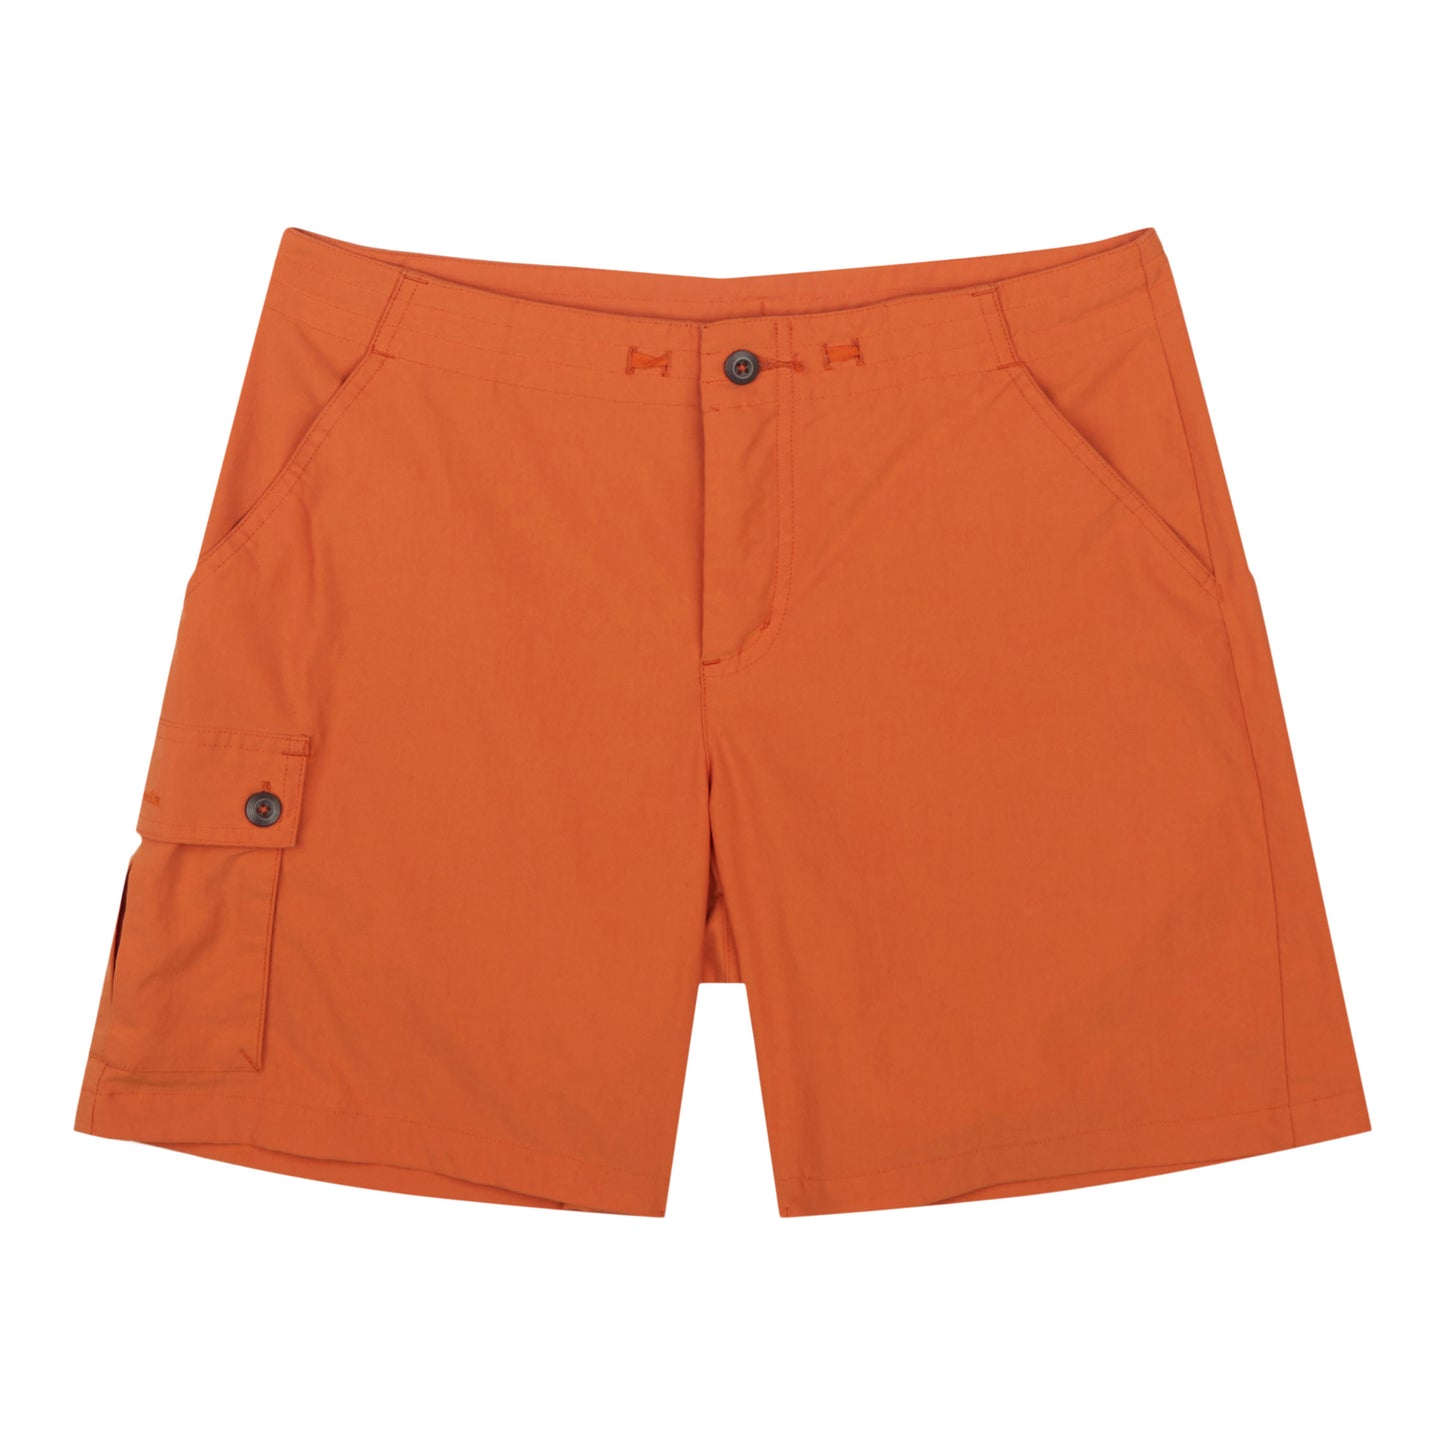 W's Inter-Continental Shorts